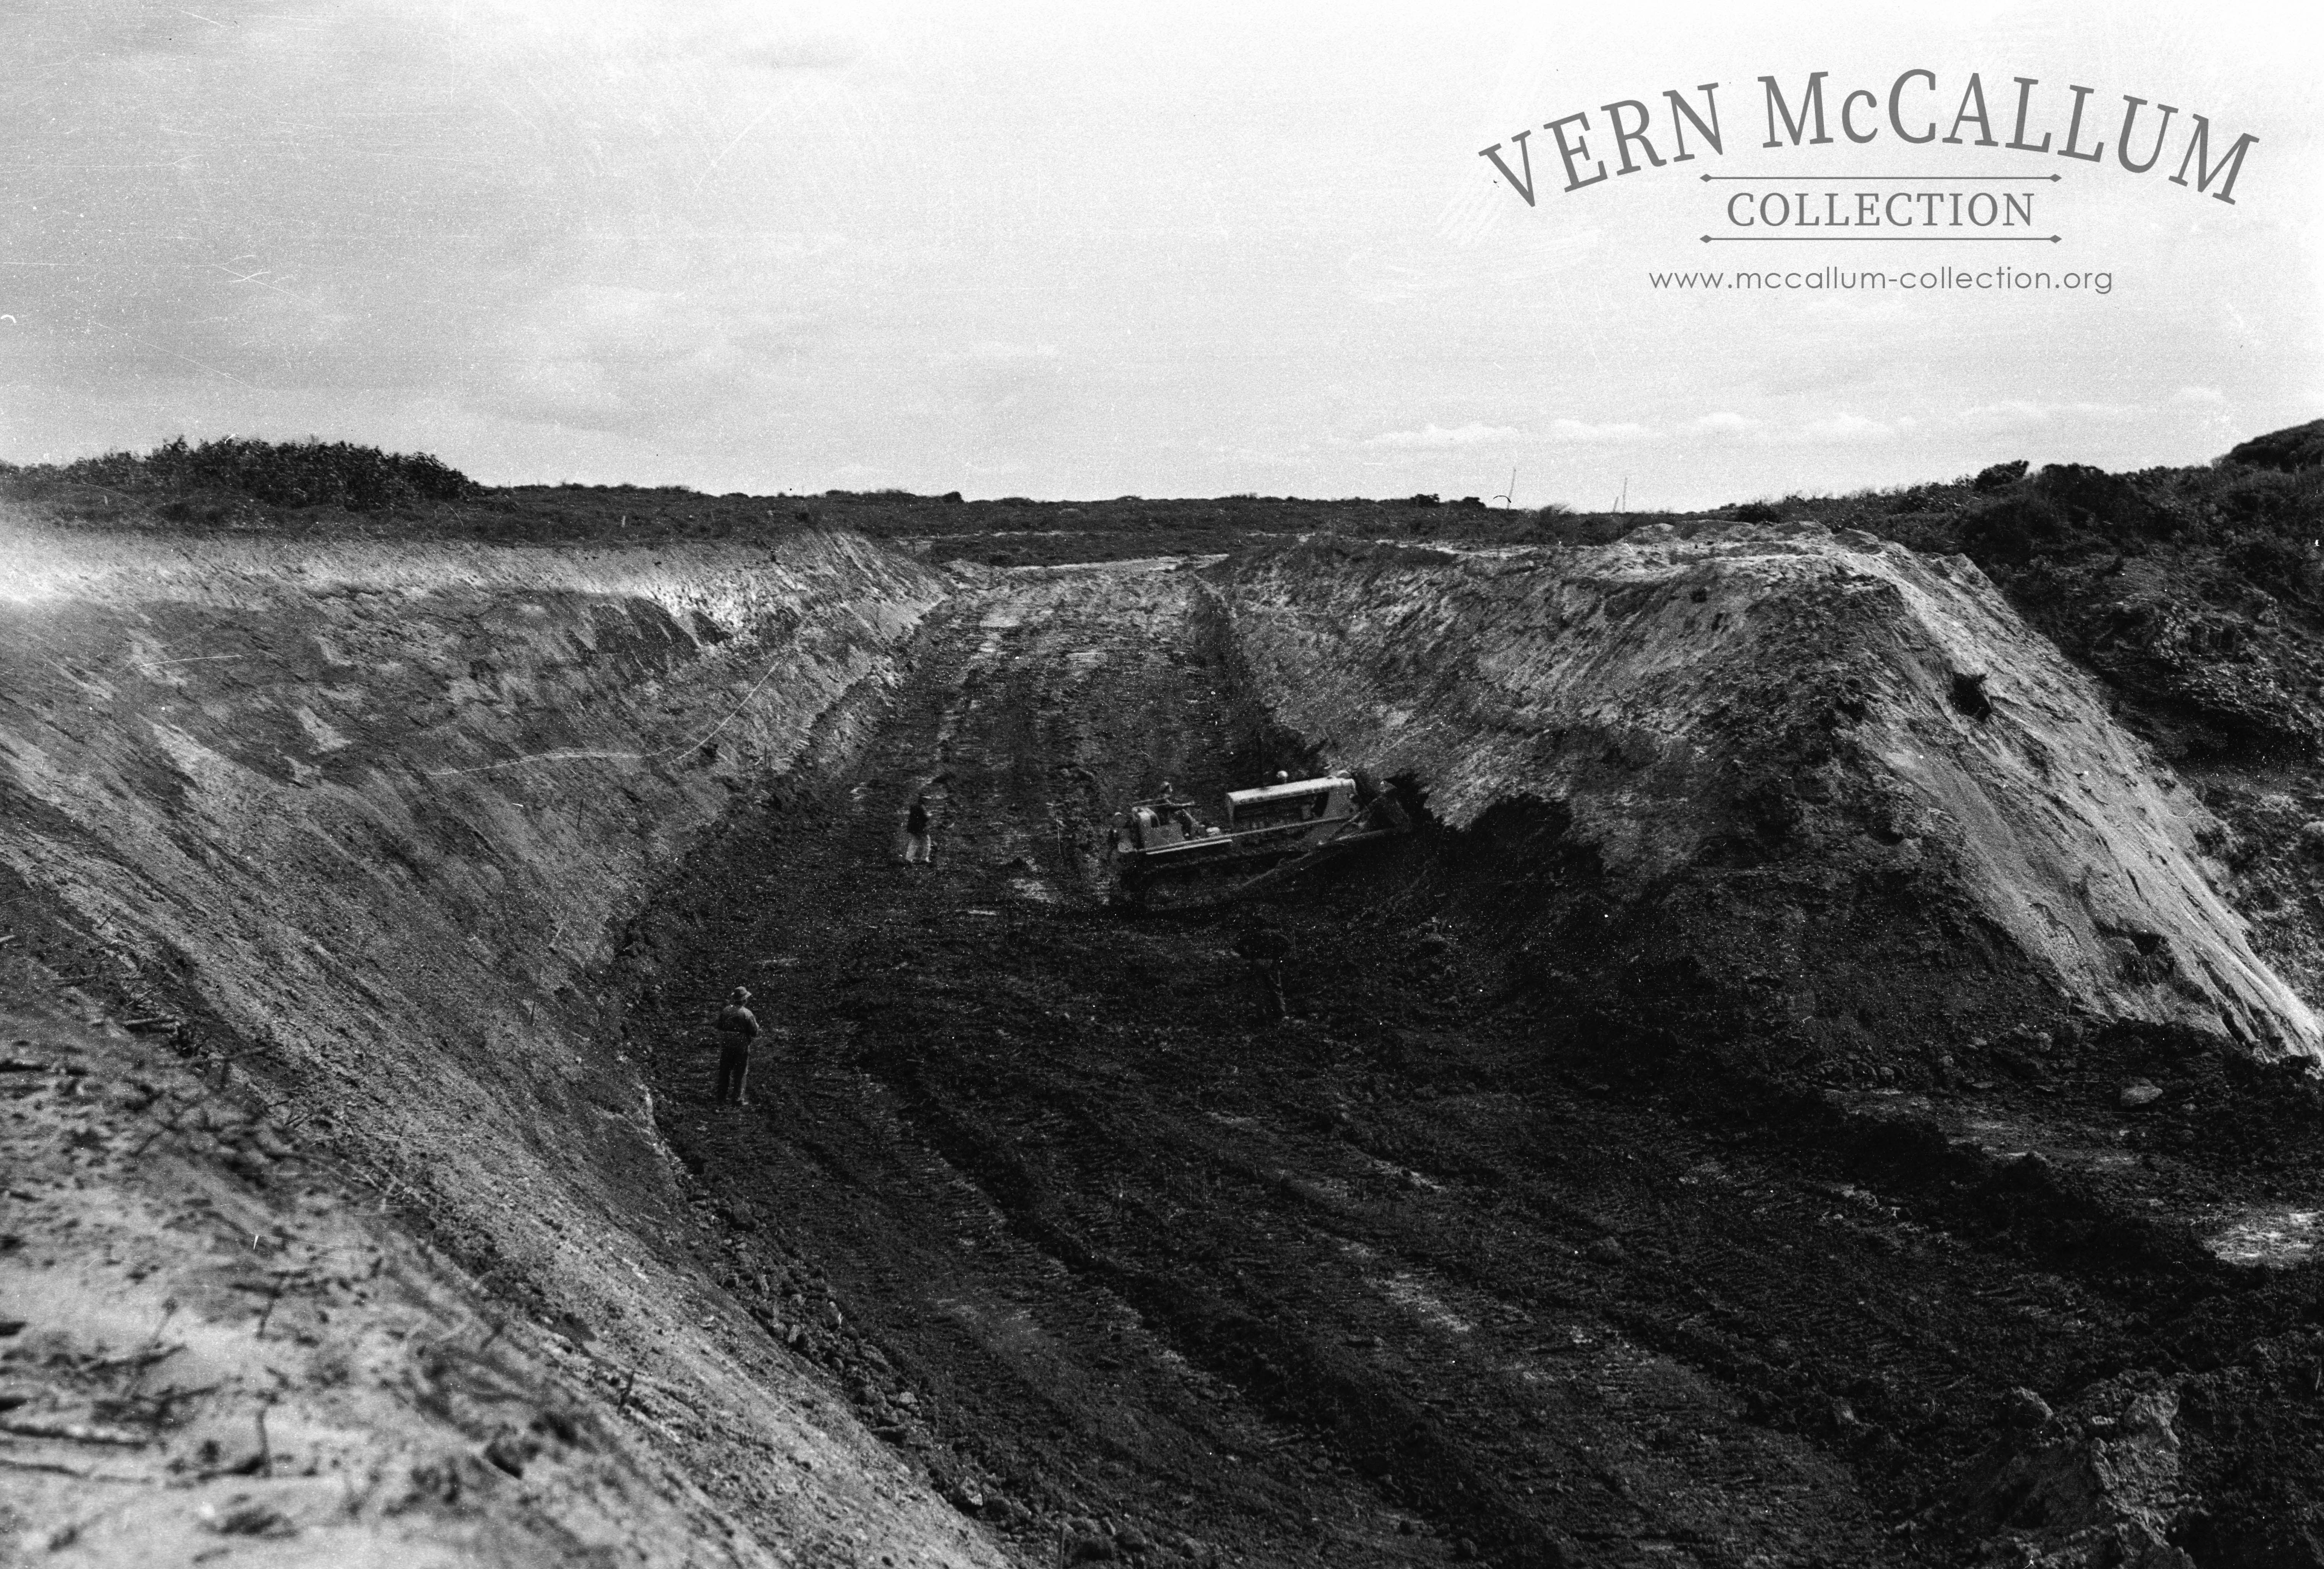 Working on the cutting before the Cape Grant quarry.It appears that the dozer has
 C R B on the bonnet